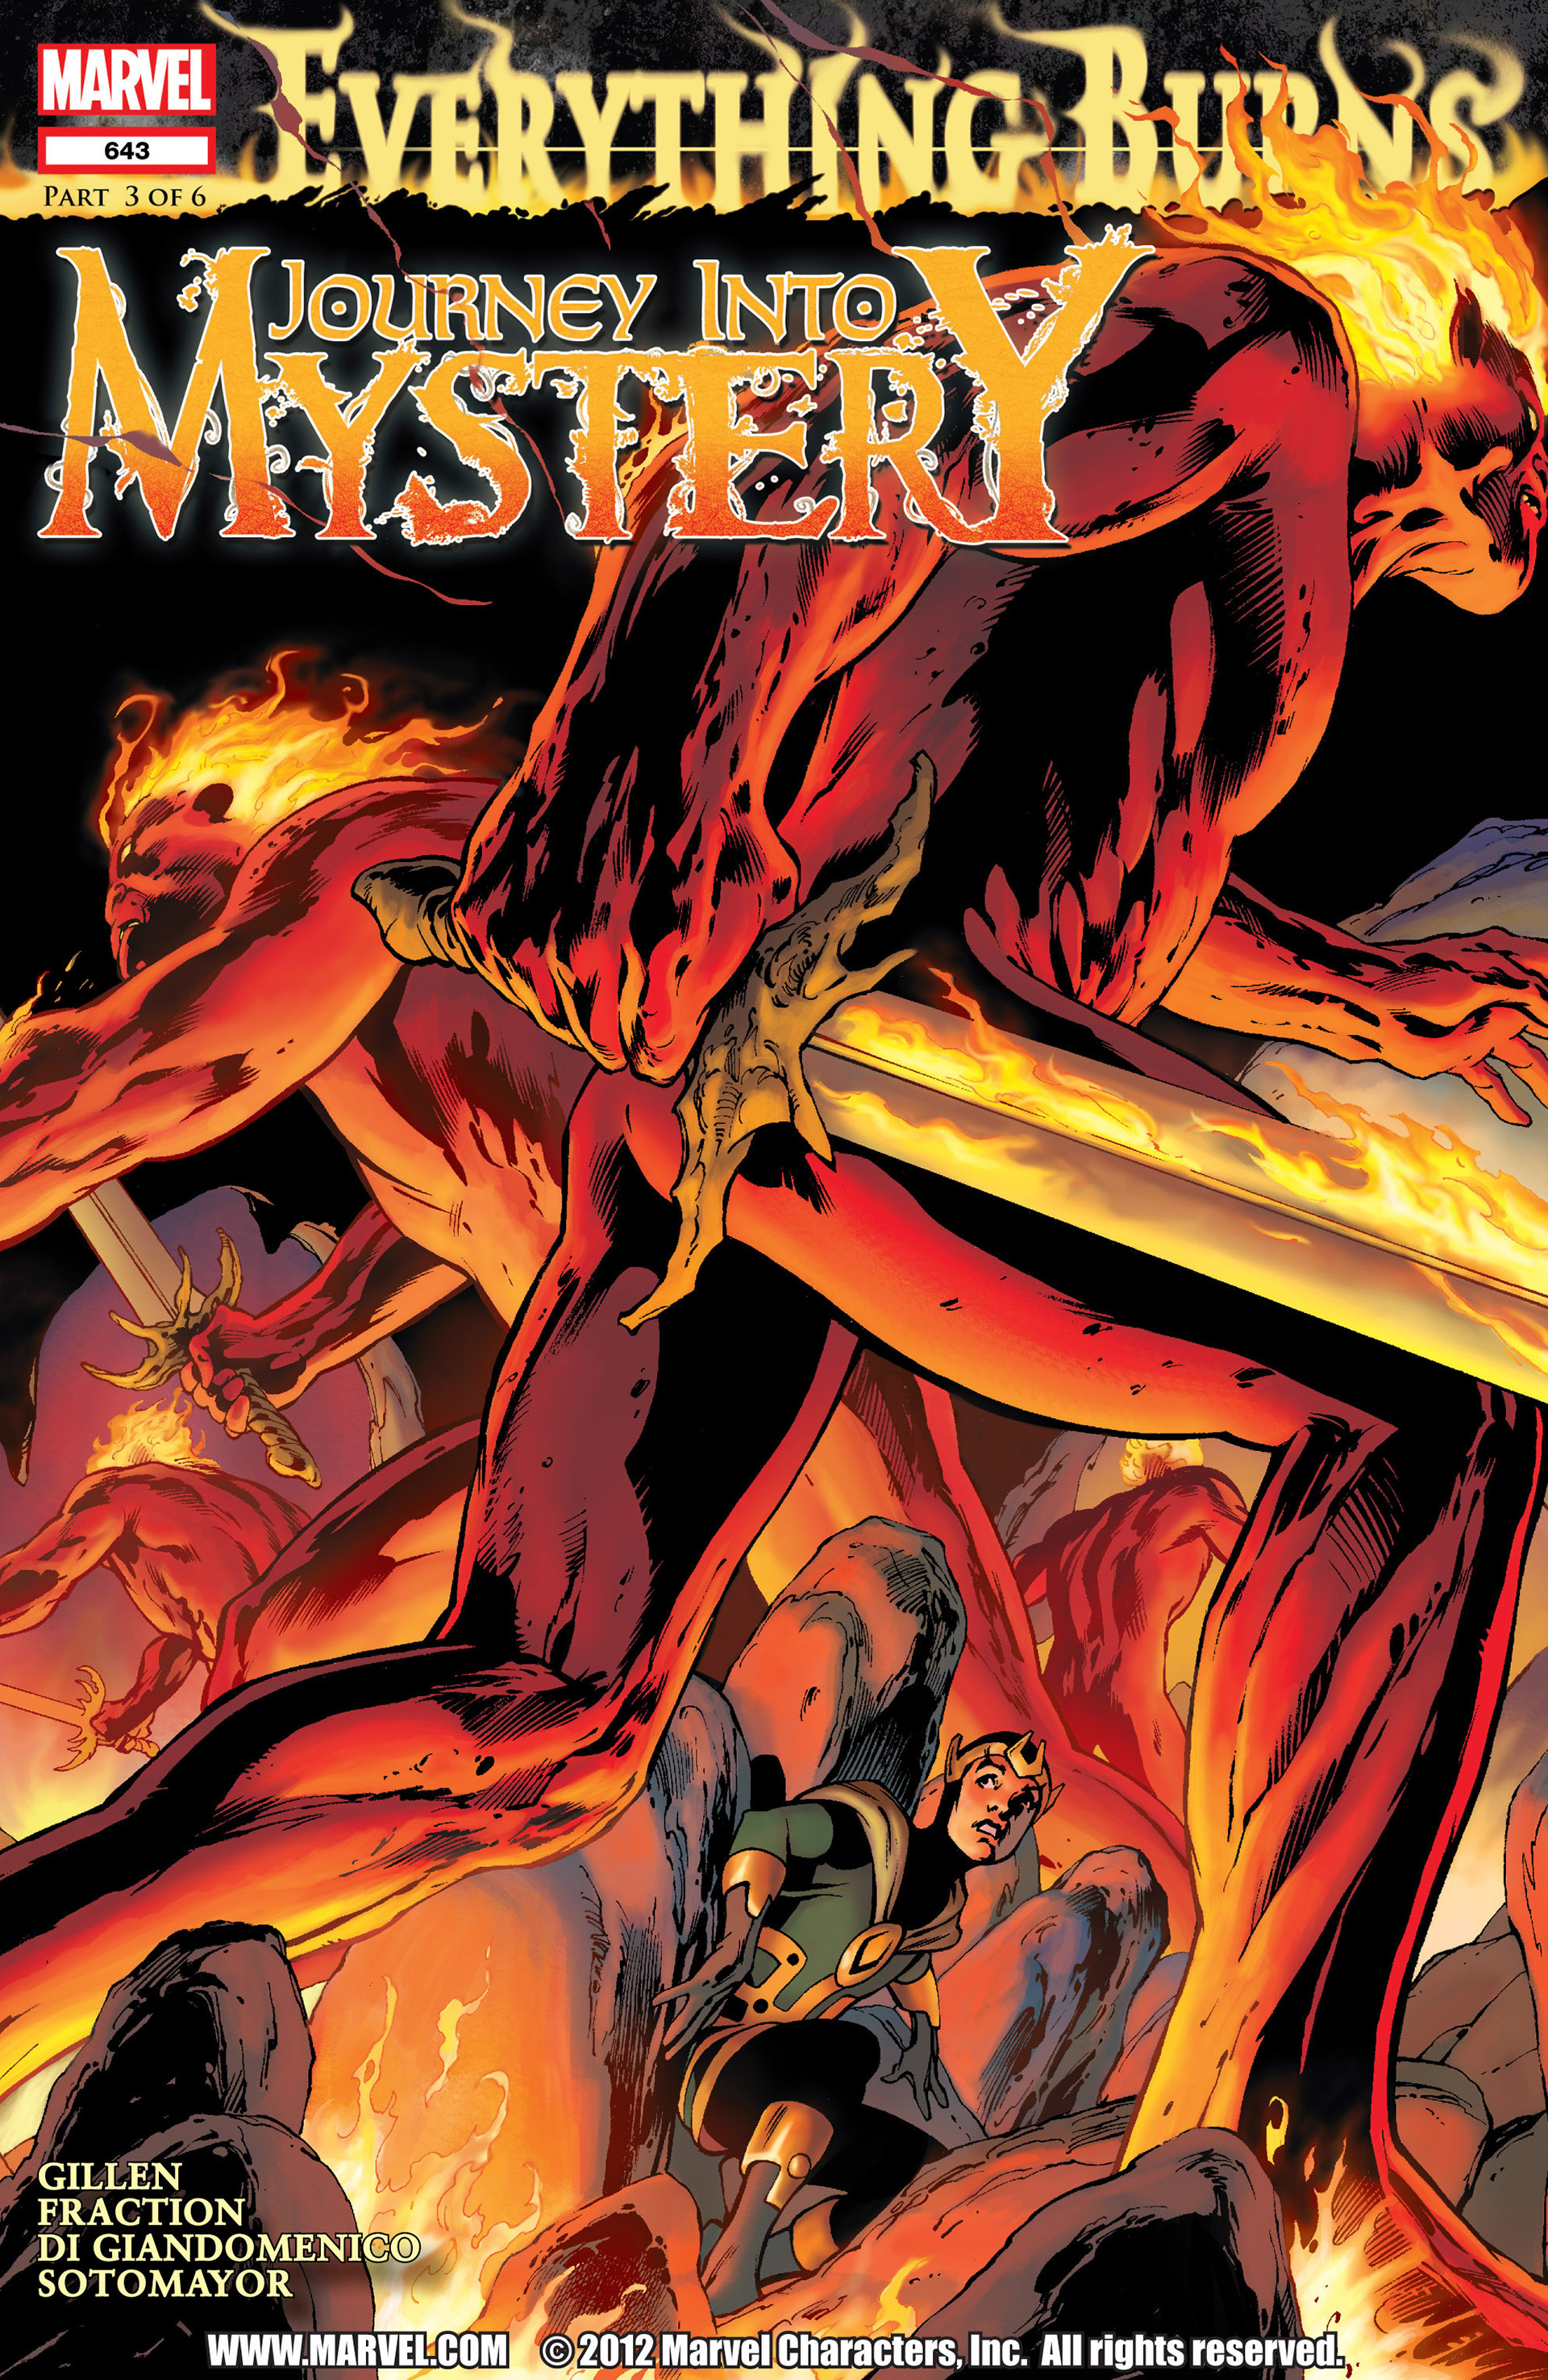 Read online Journey into Mystery (2011) comic -  Issue #643 - 1